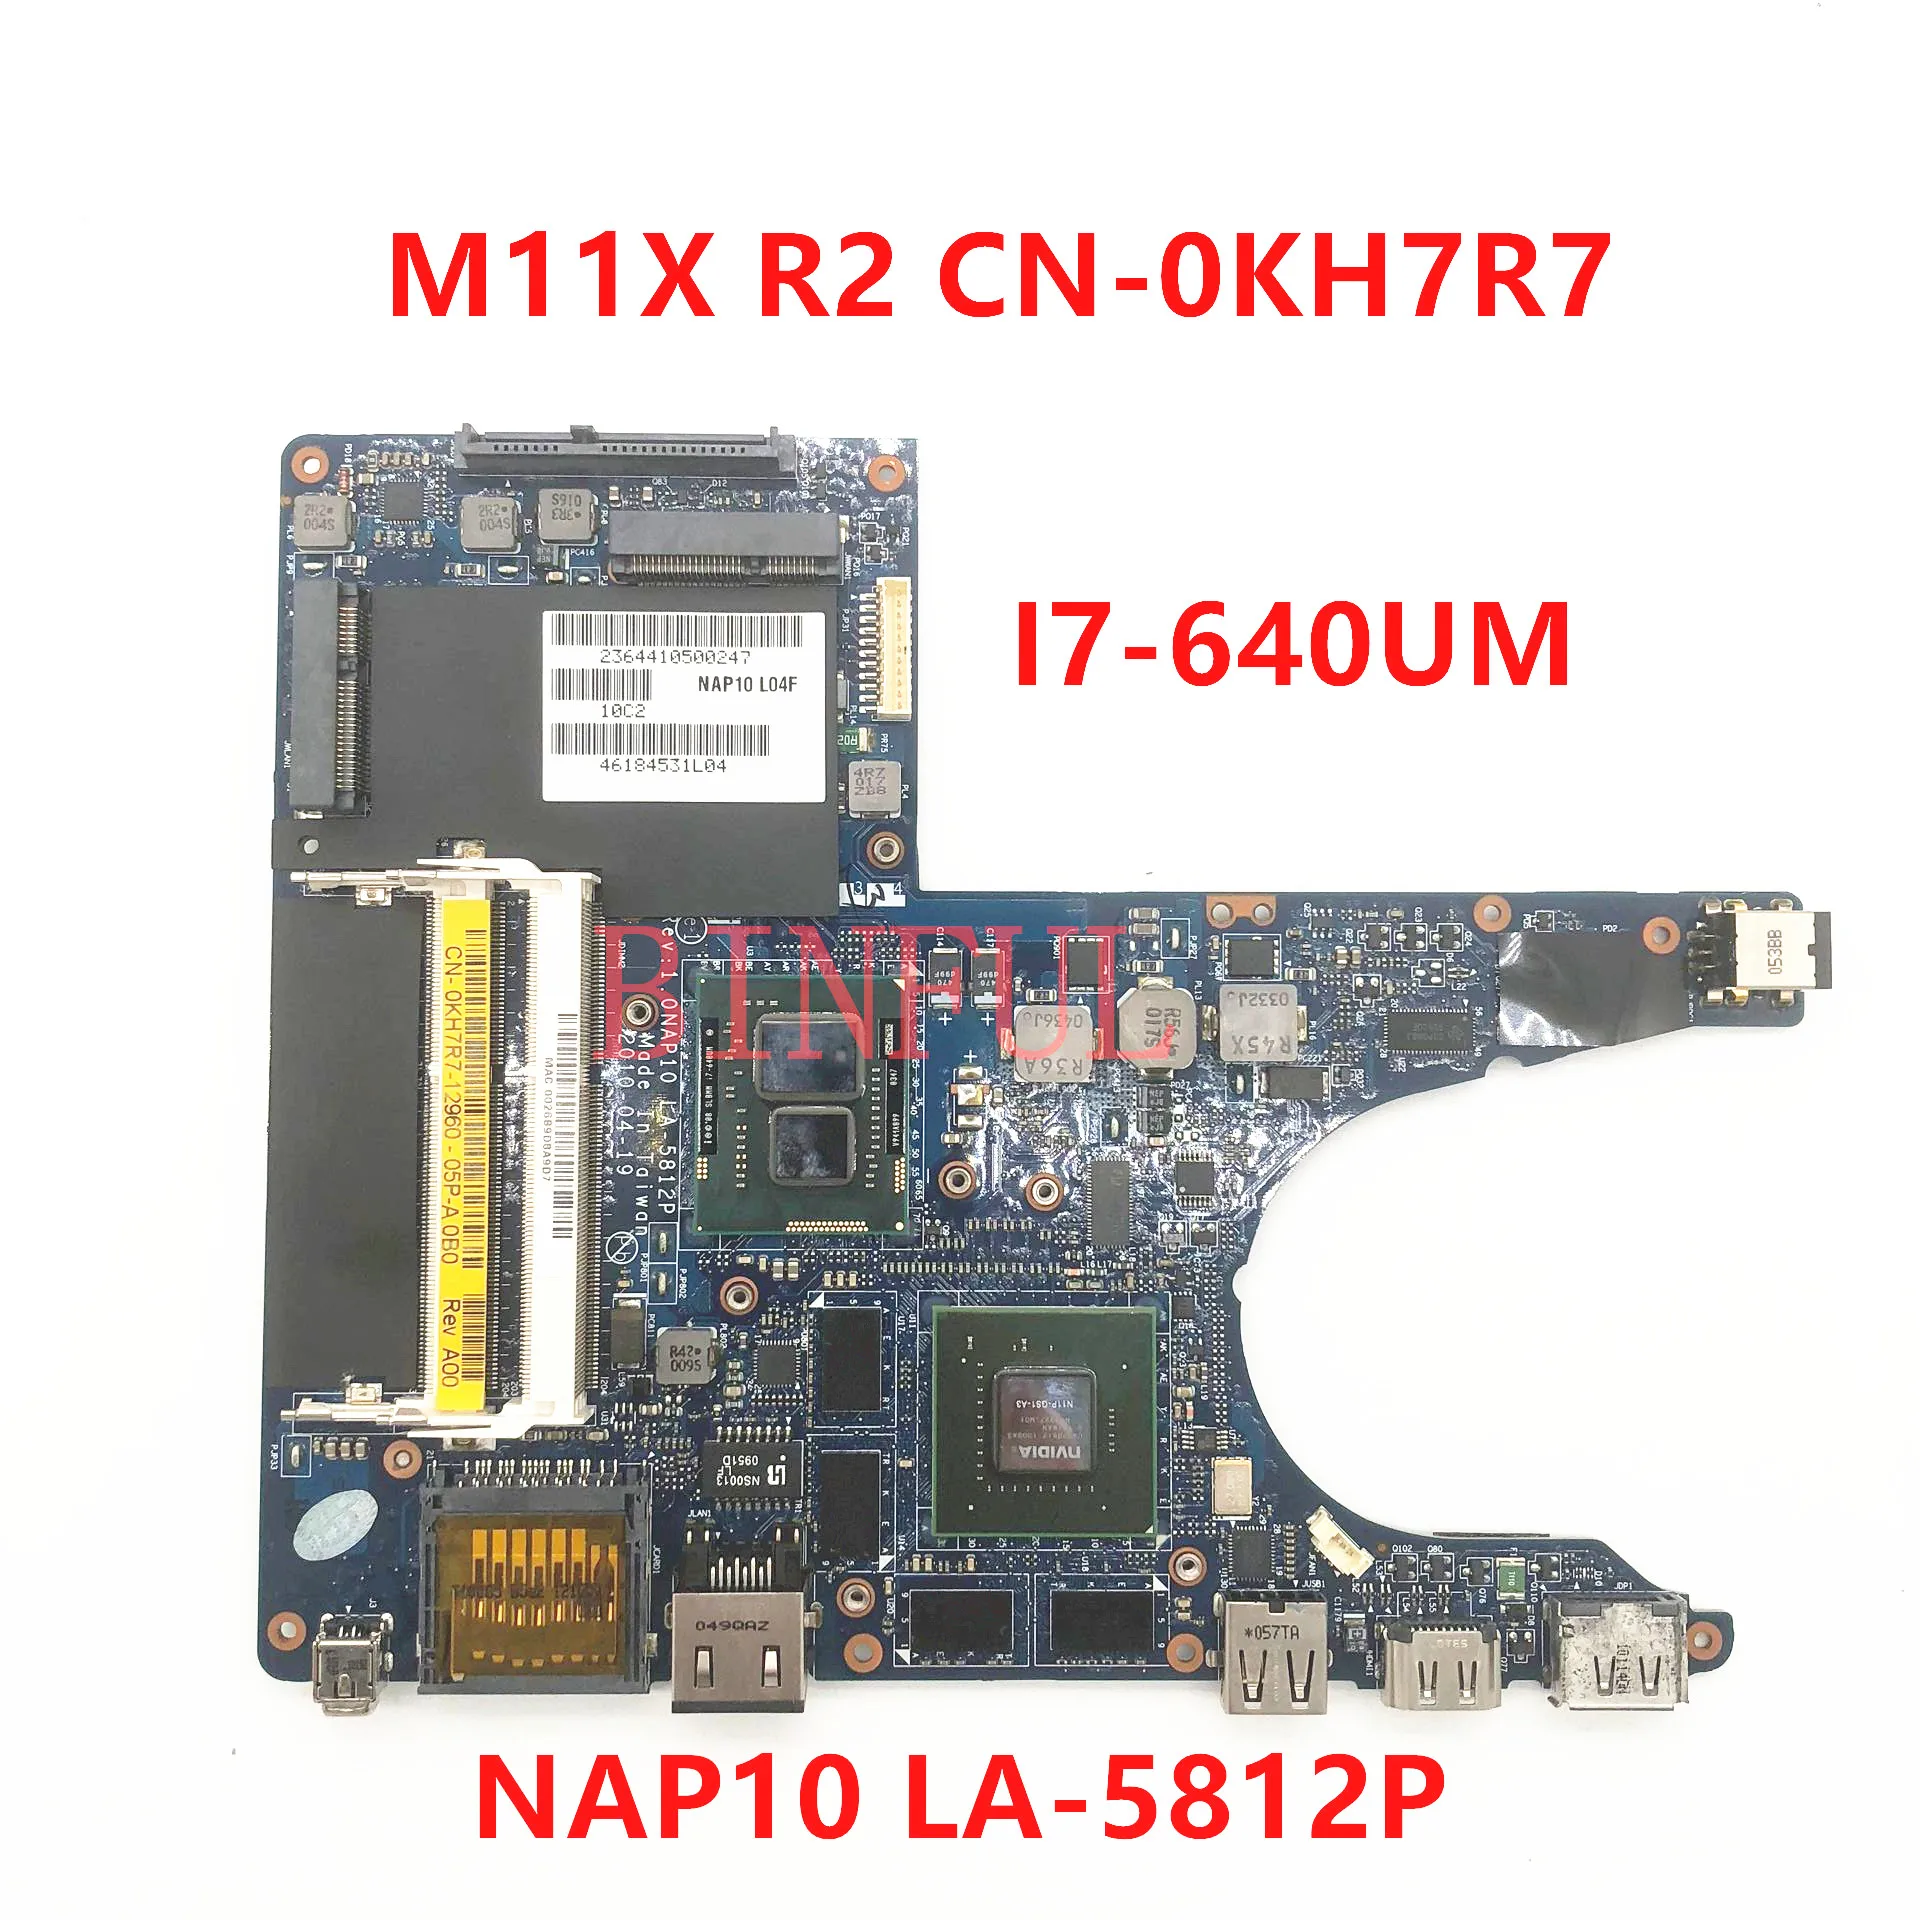 High Quality Mainboard For M11X R2 CN-0KH7R7 0KH7R7 KH7R7 Laptop Motherboard I7-640UM CPU DDR3 LA-5812P 100% Full Working Well